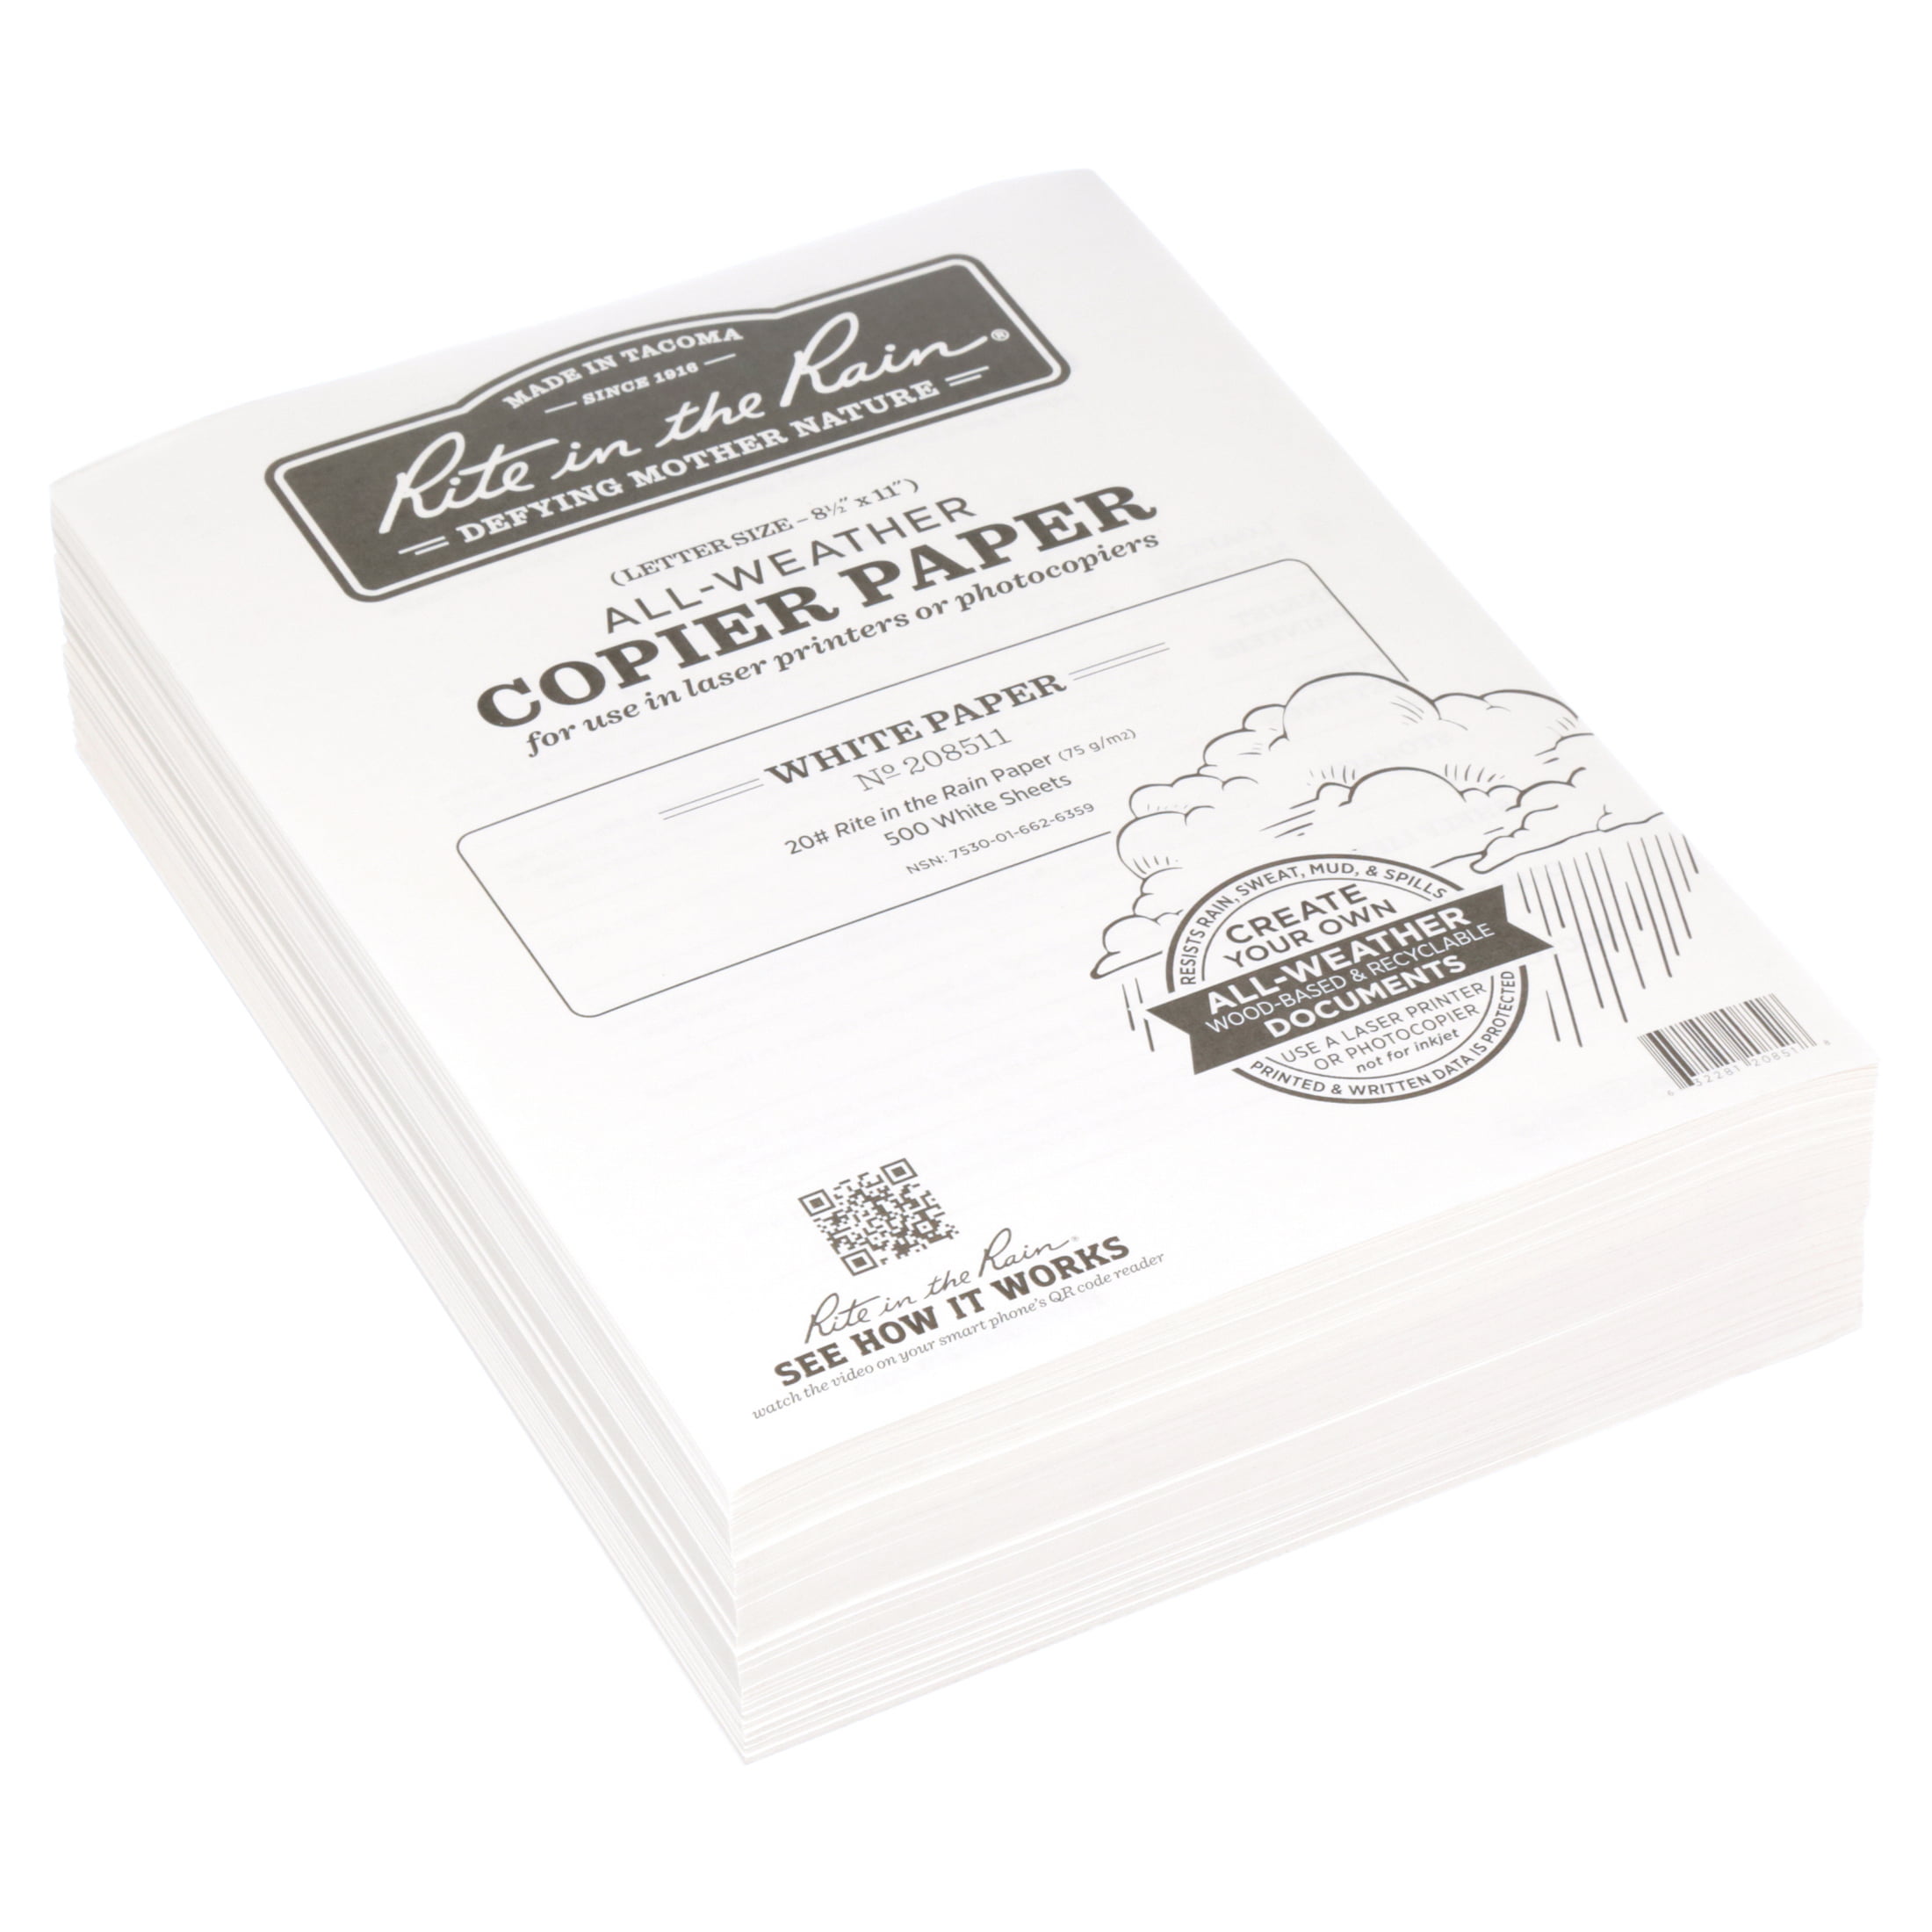 Rite in the Rain All-Weather 8-1/2 in. x 11 in. 100 lbs. Printer Paper,  White (250-Sheet Pack) 1008511 - The Home Depot